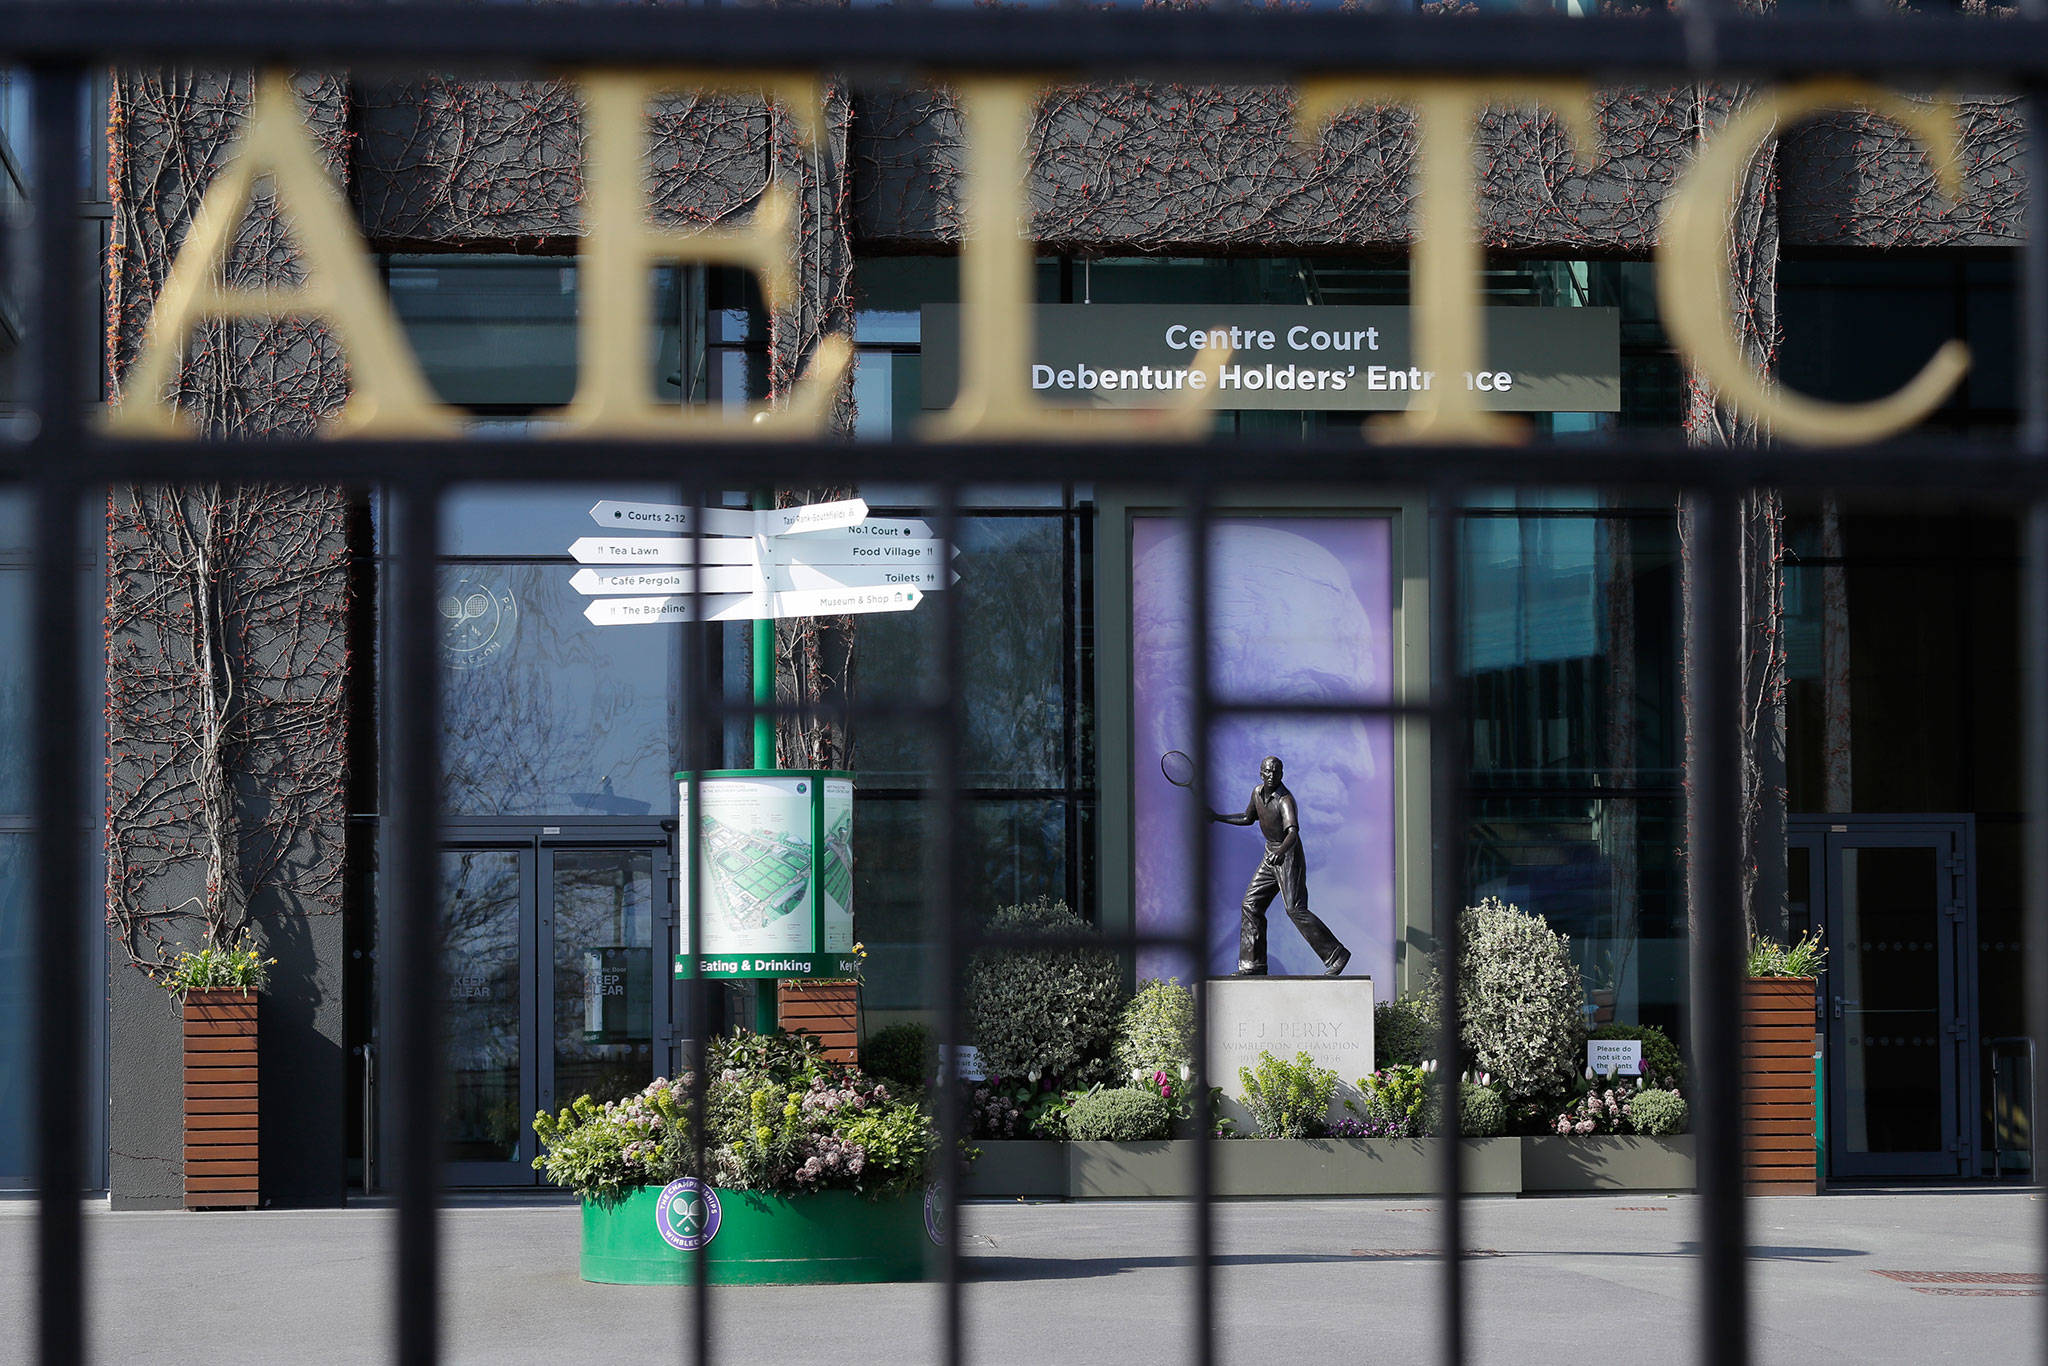 One of the main public entrances to All England Lawn Tennis and Croquet club in London where the Wimbledown tournament is held. (AP Photo/Kirsty Wigglesworth)